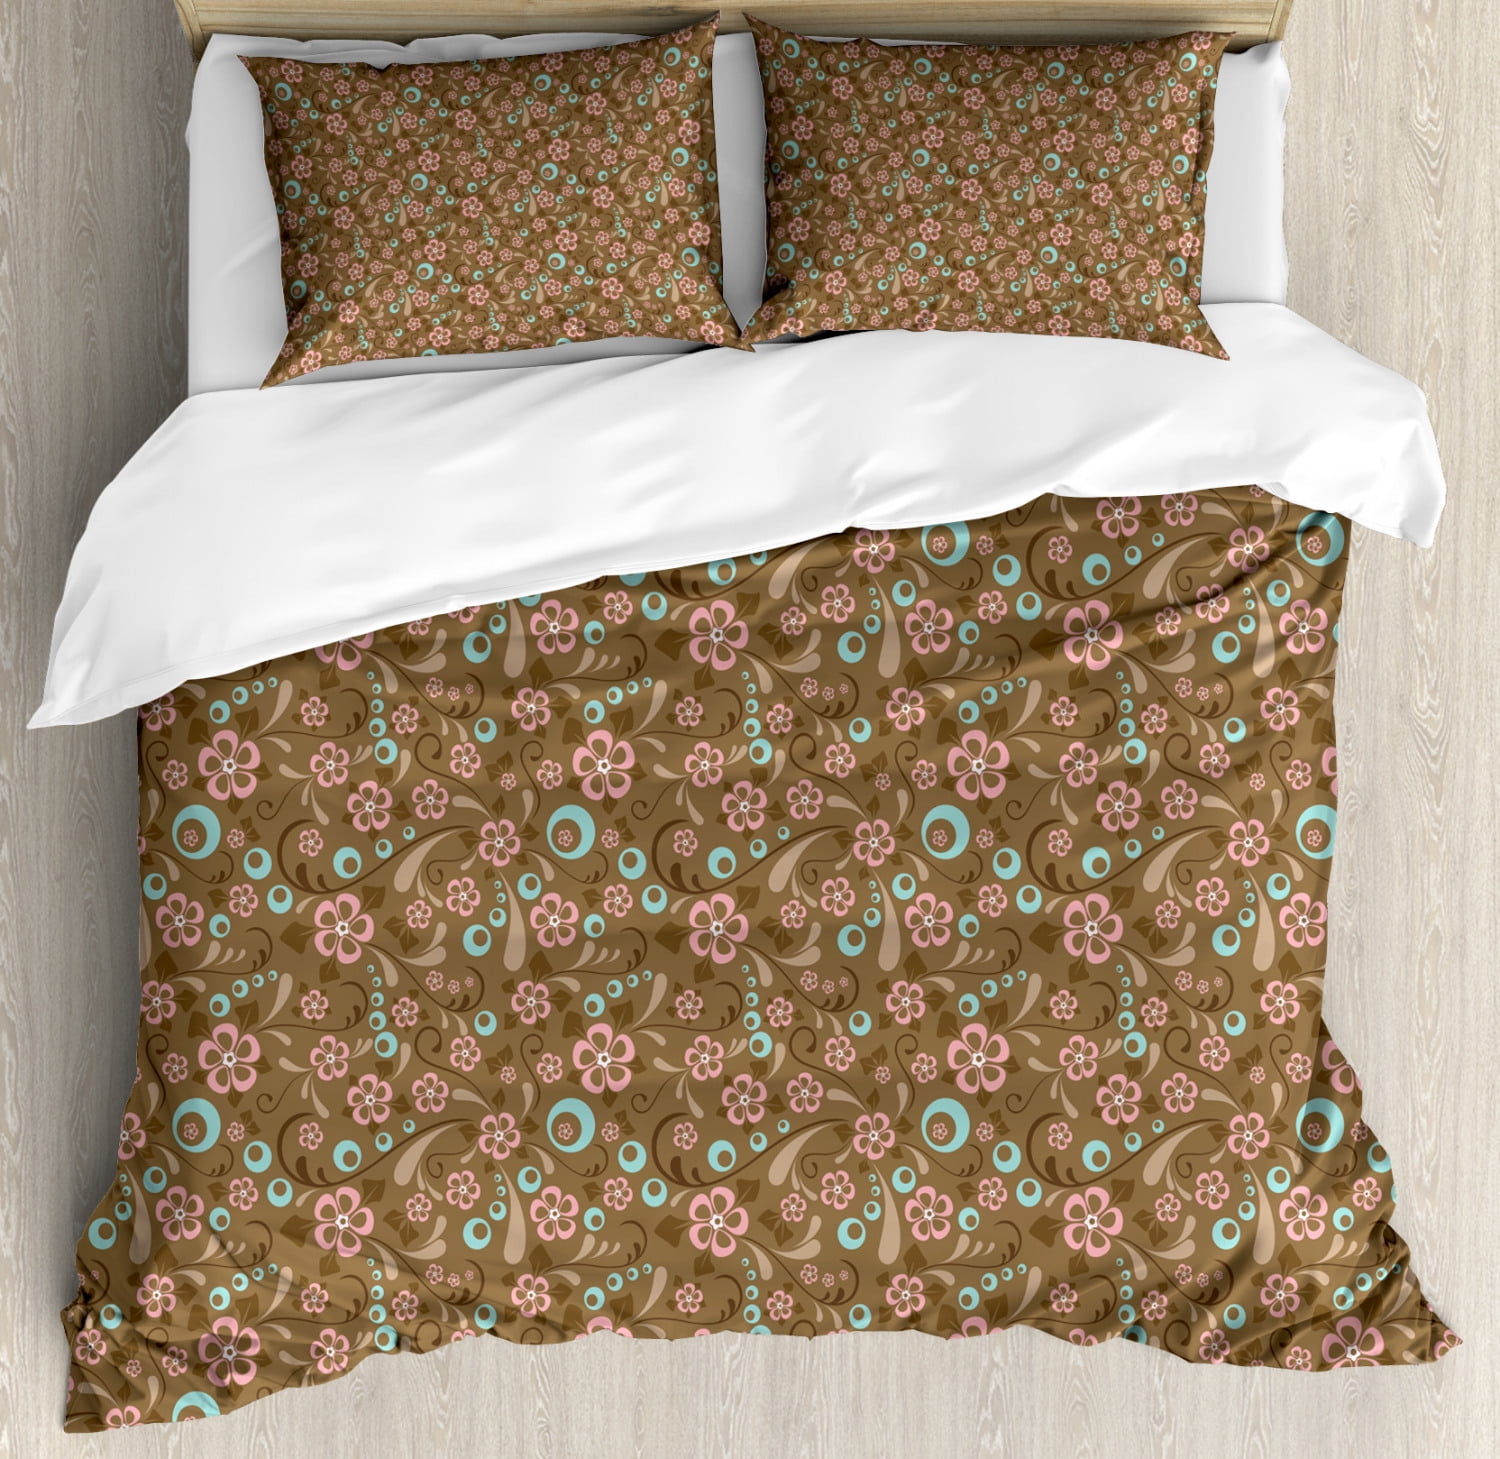 Brown And Blue Duvet Cover Set Floral Pattern With Swirls Circles